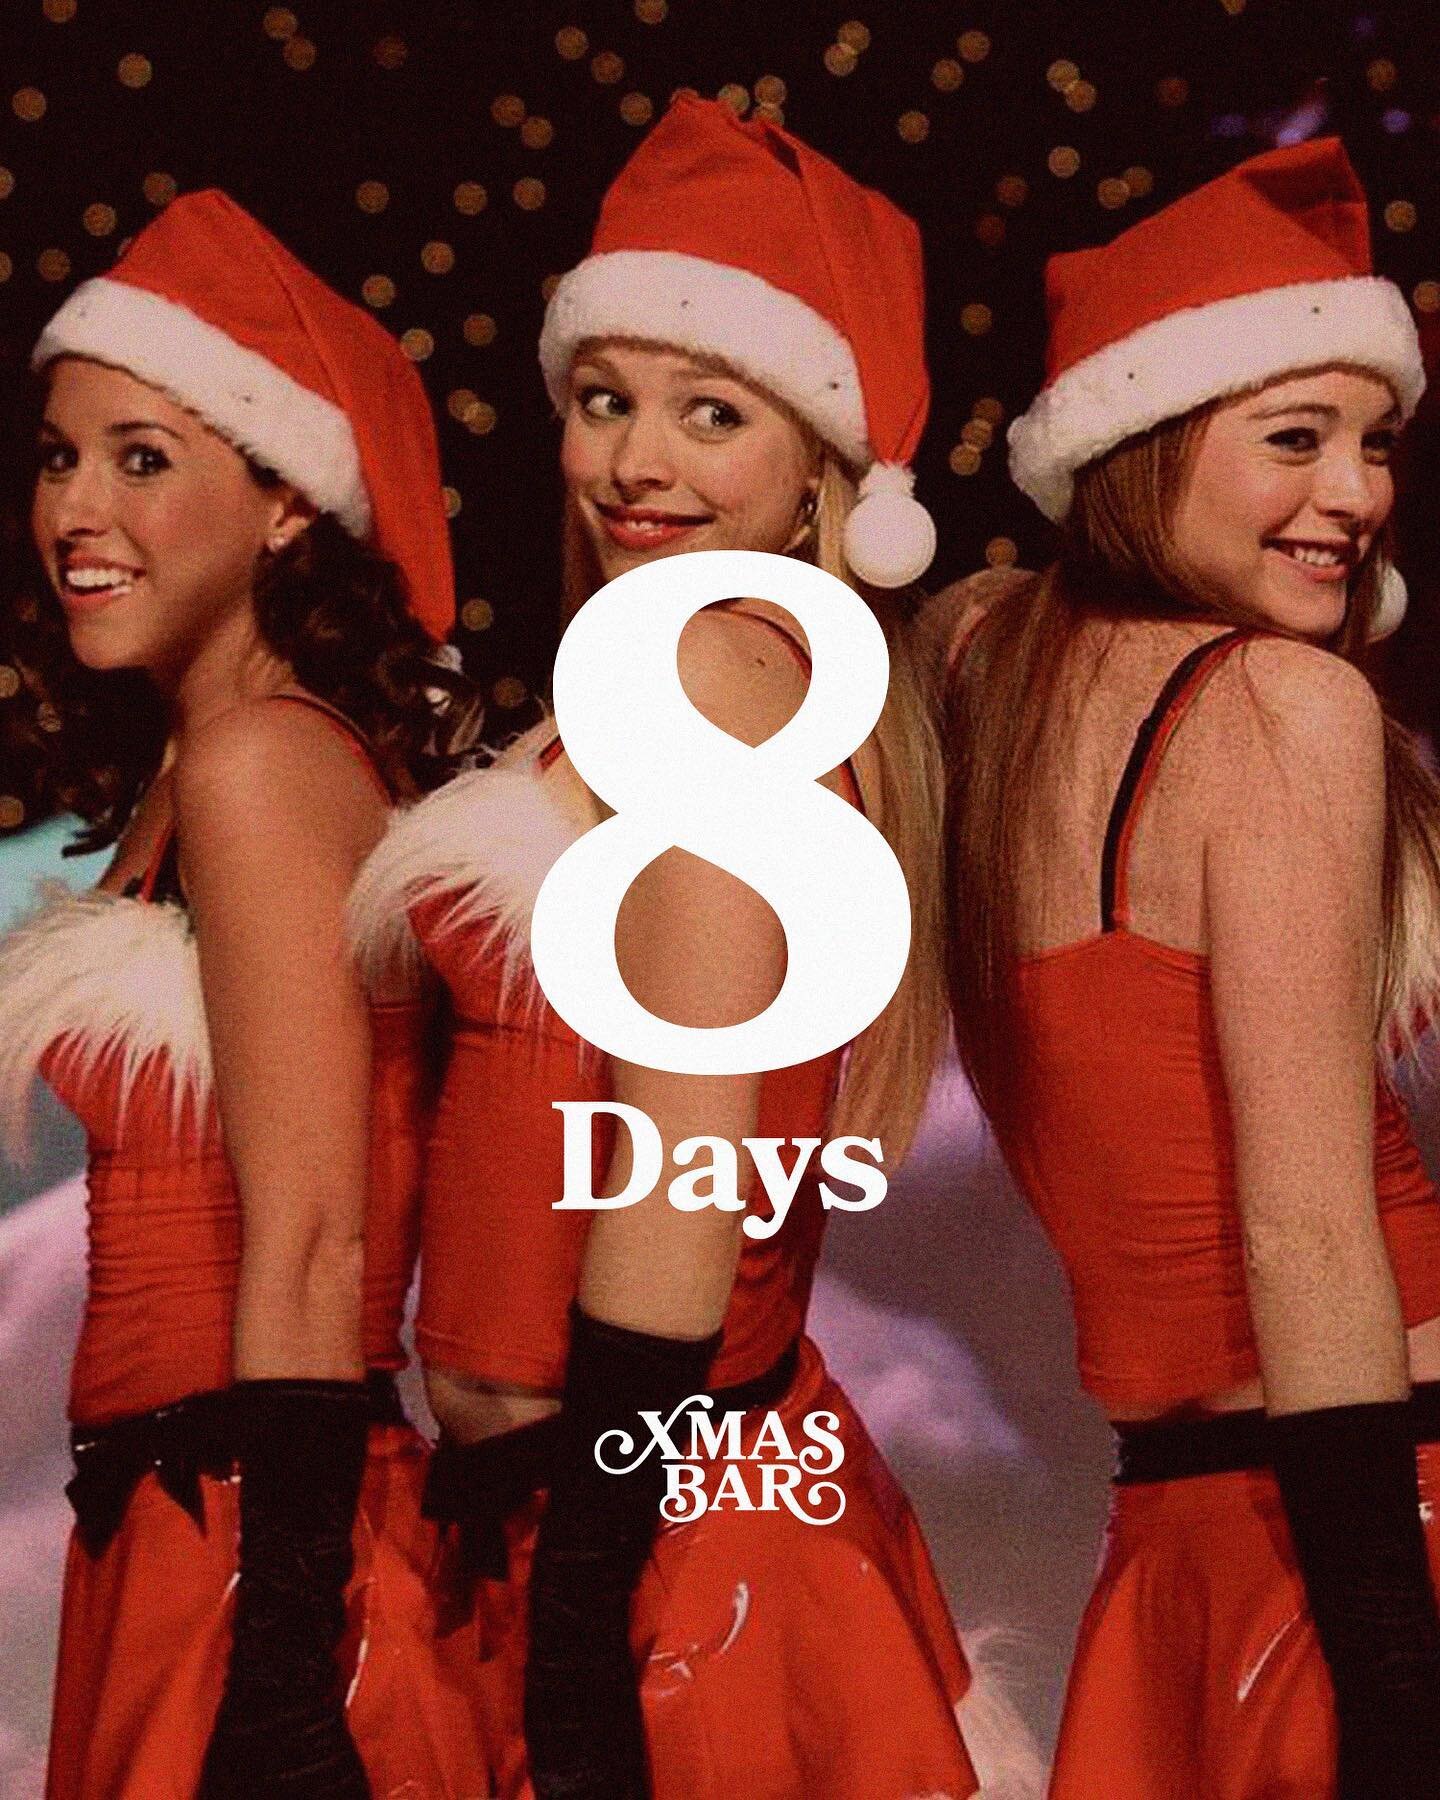 8 more days until we get to jingle bell rock 🎸

book your events via events@forwardhg.com 🎄